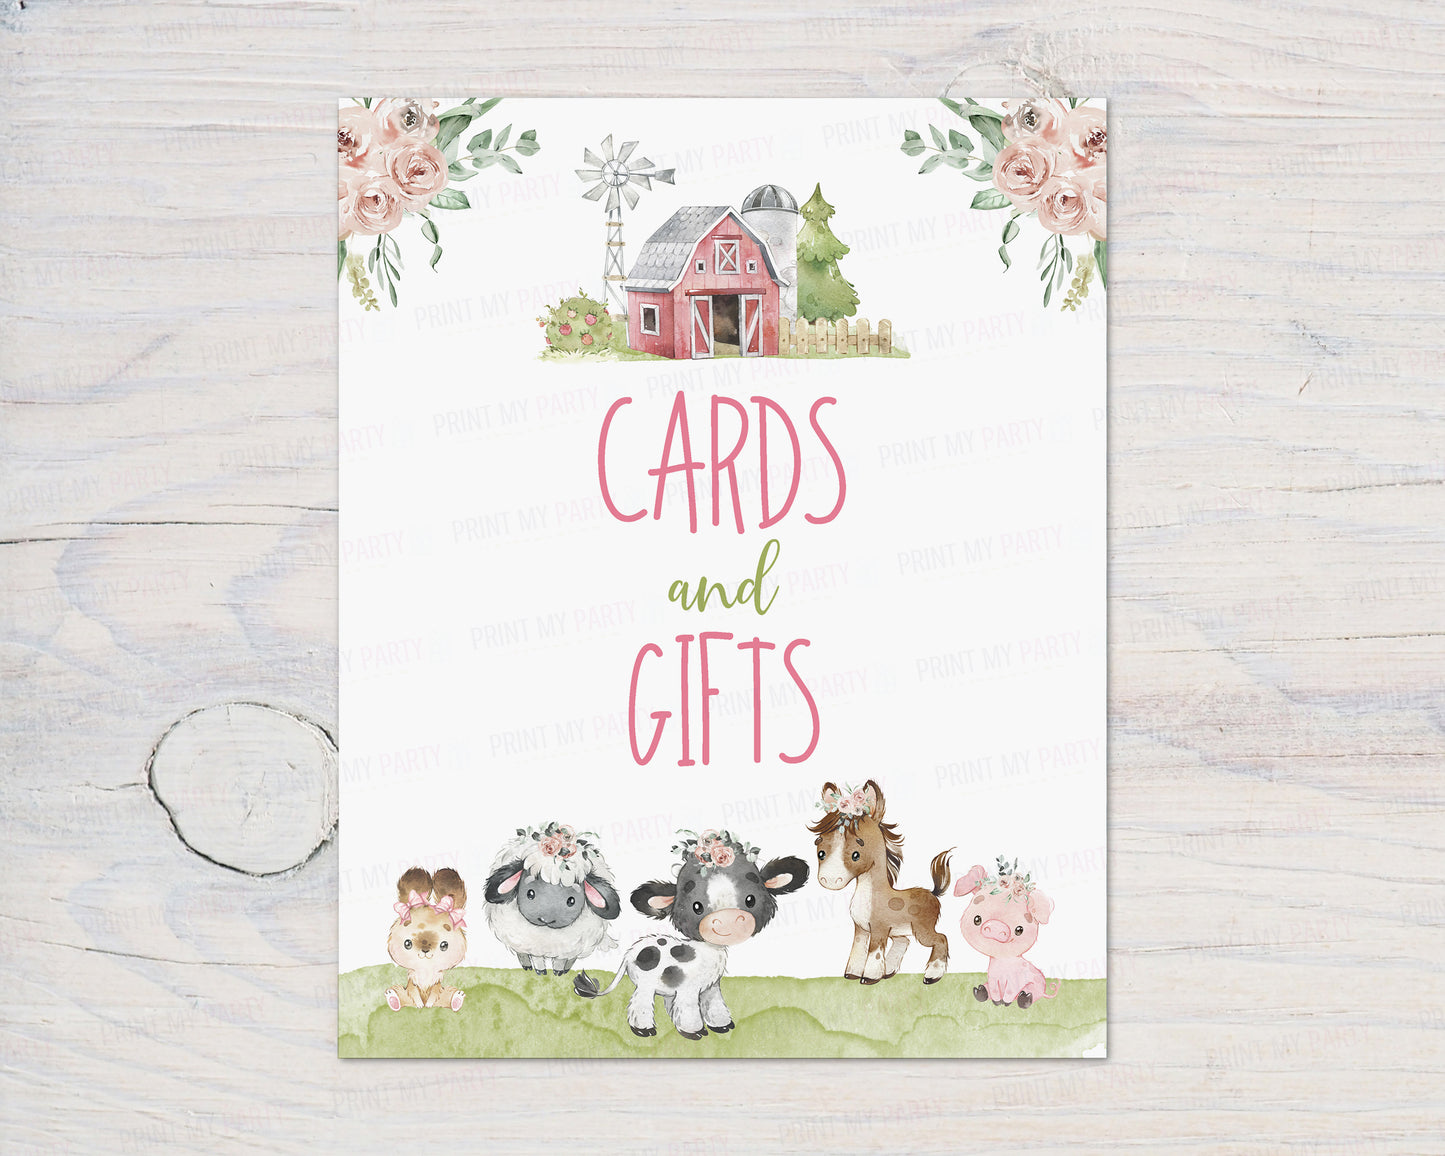 Cards and Gifts Sign Printable | Floral Farm Party Table Decoration - 11C1